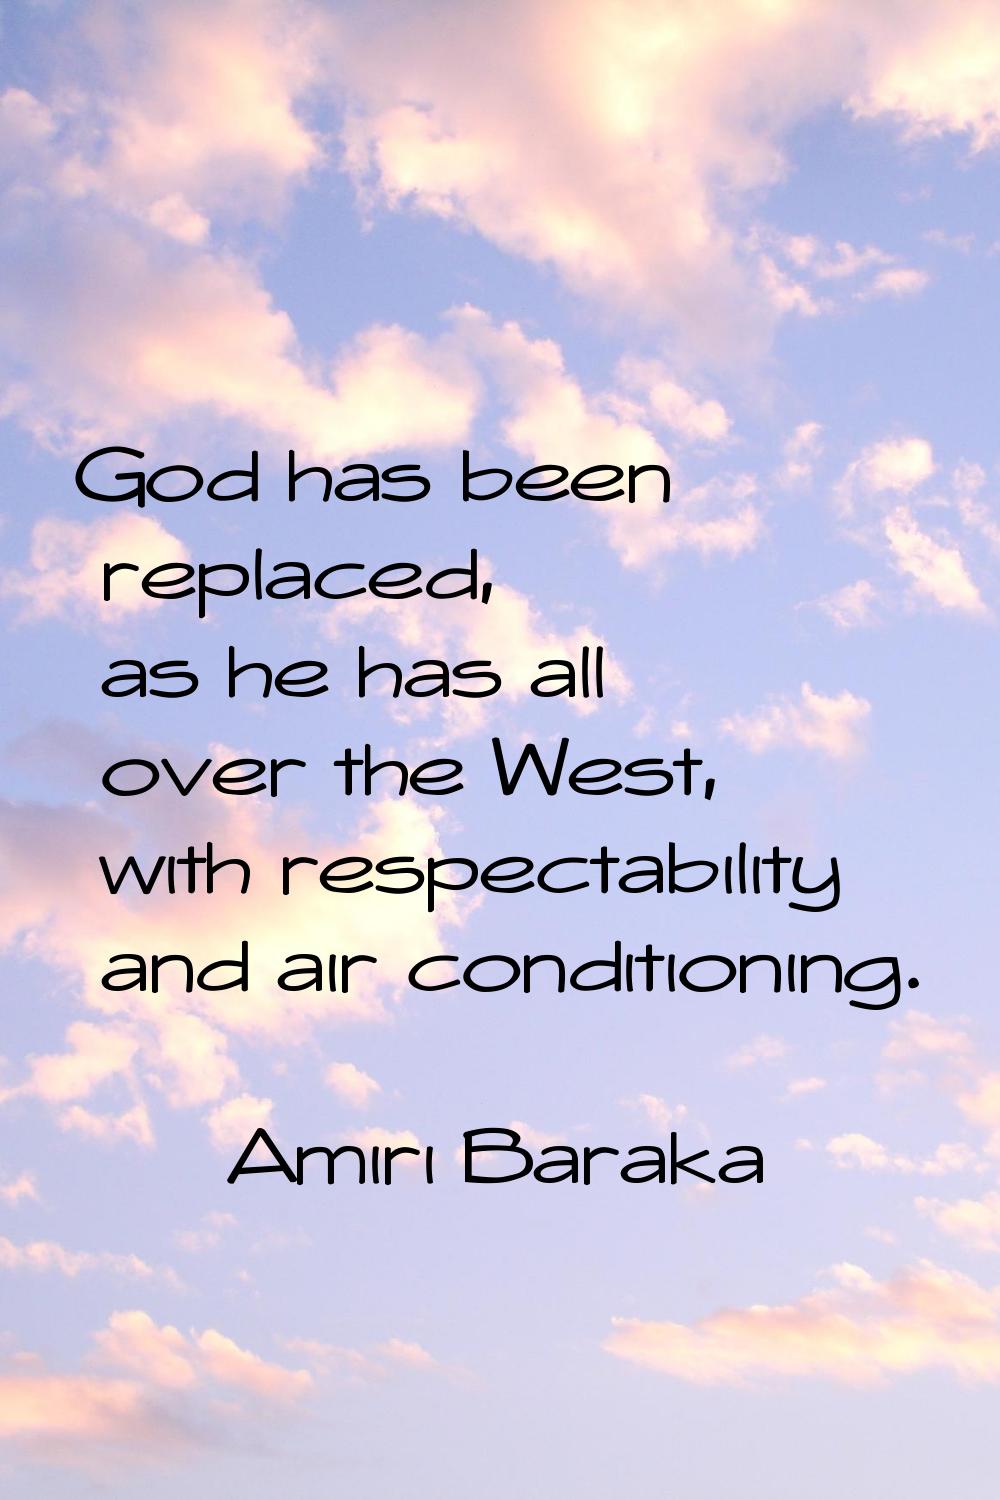 God has been replaced, as he has all over the West, with respectability and air conditioning.